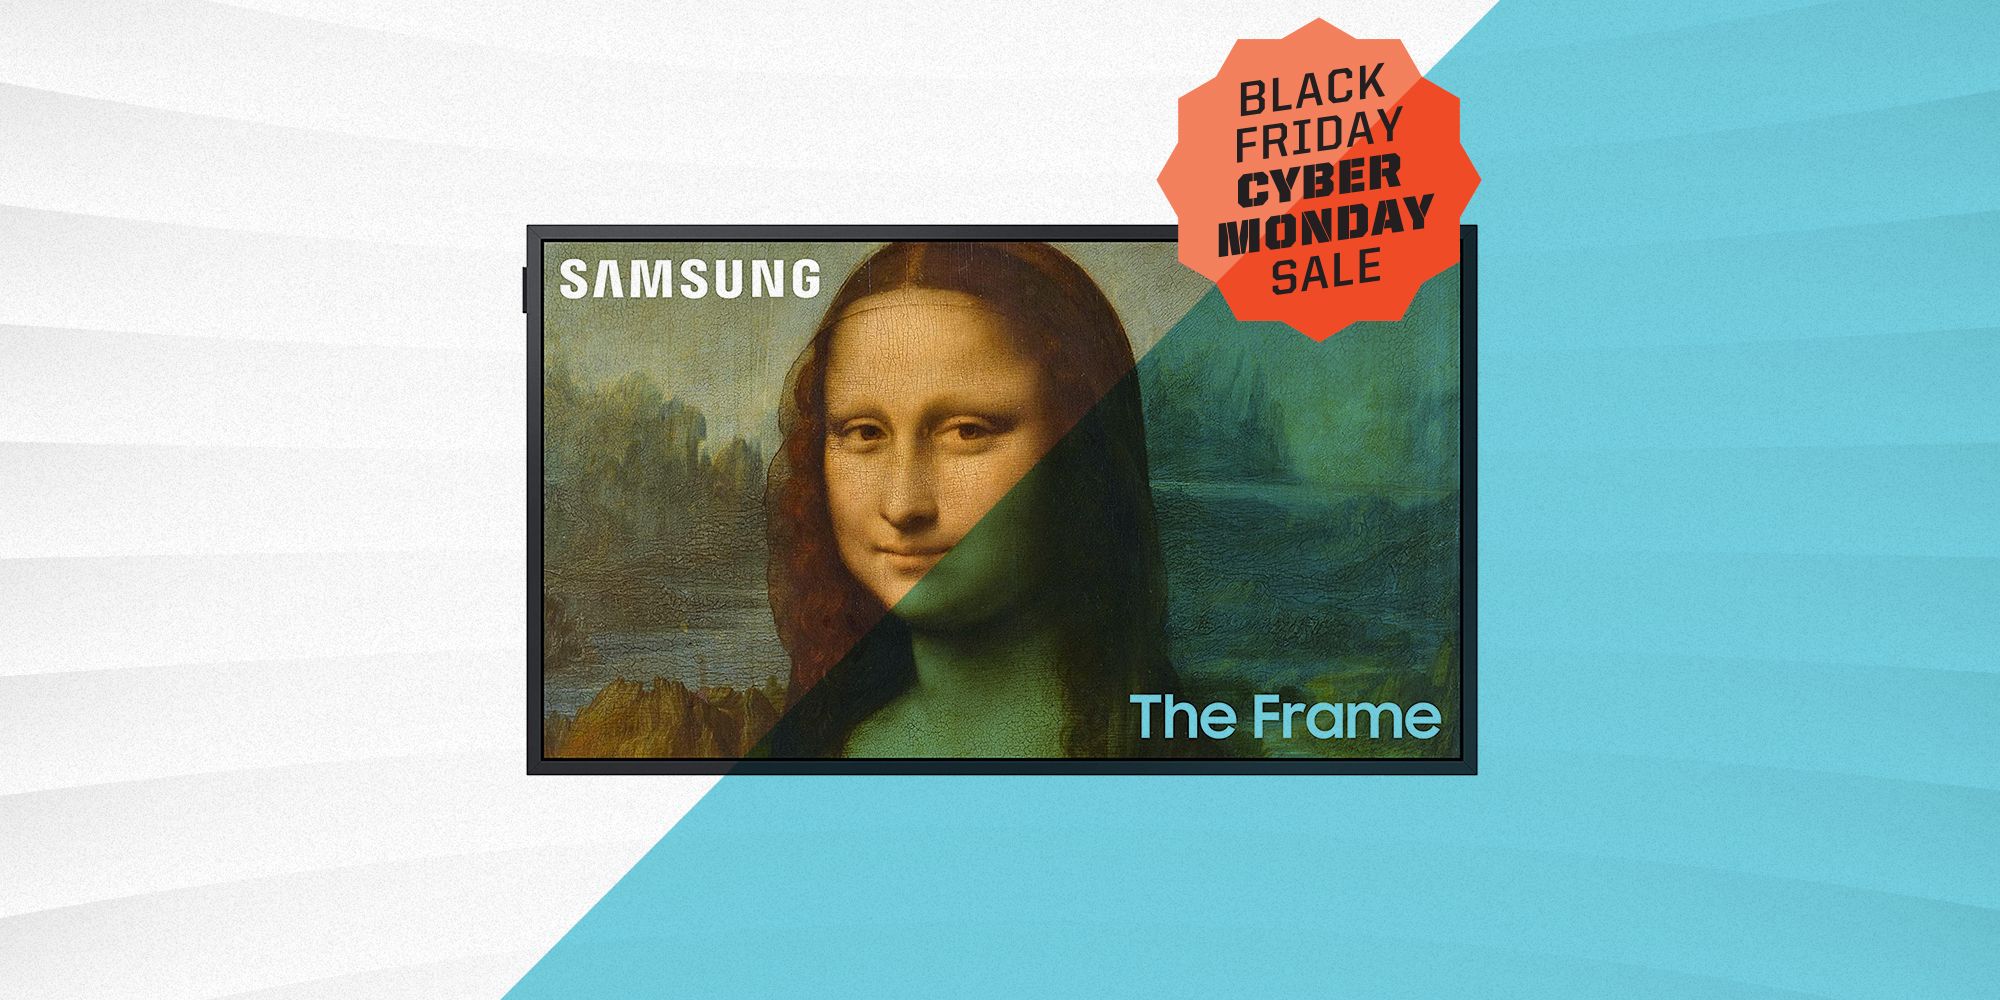 Samsung's Frame TV the Lowest Price Cyber Monday